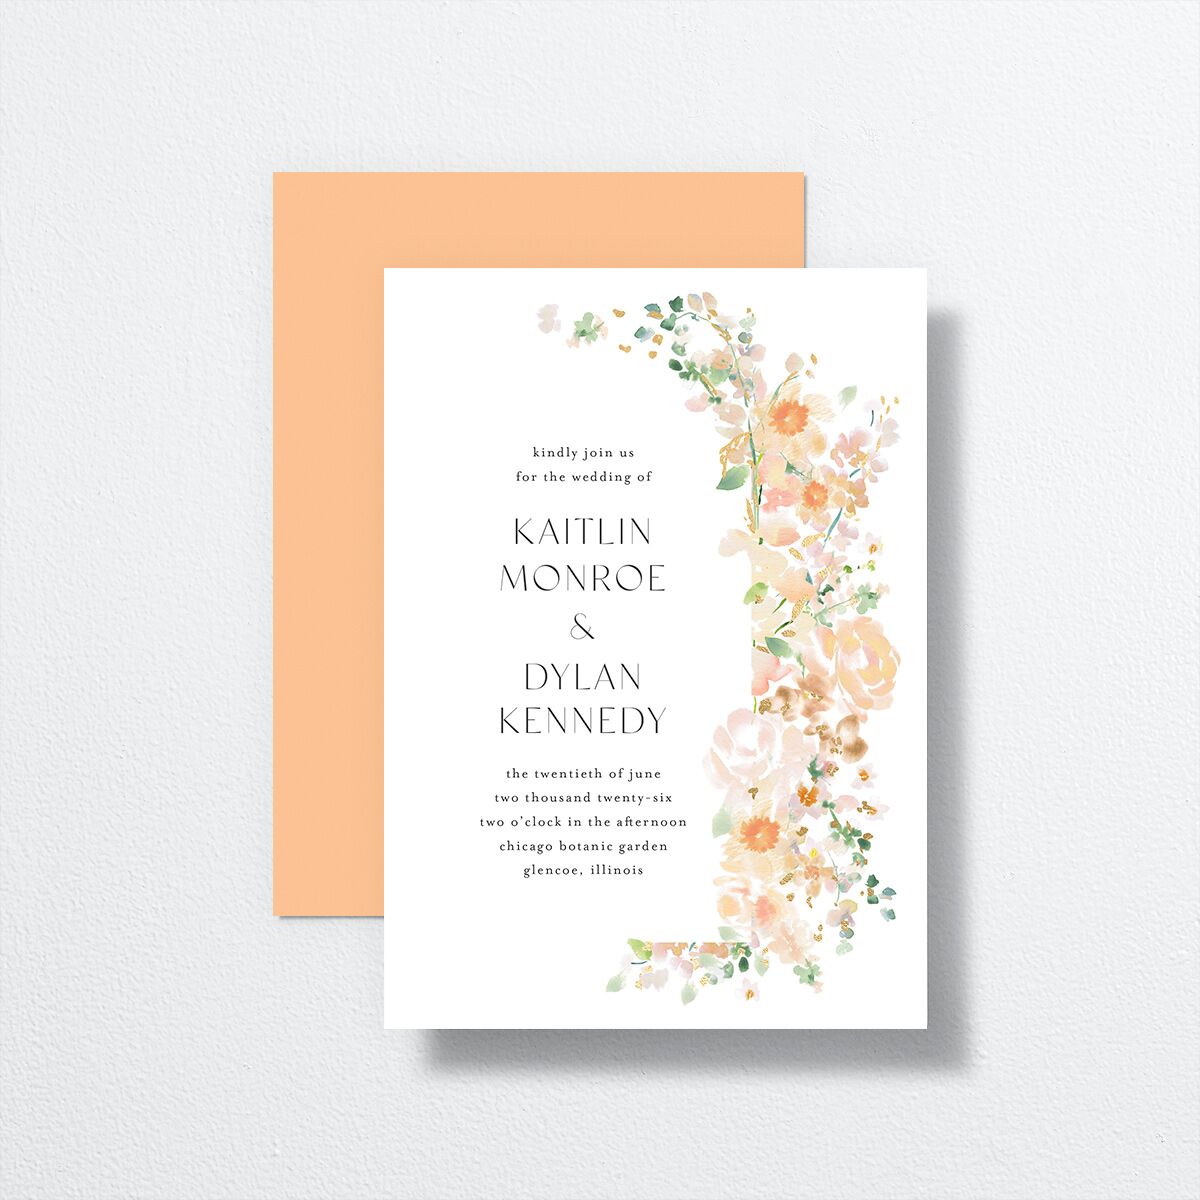 Pastel Arch Wedding Invitations front-and-back in orange